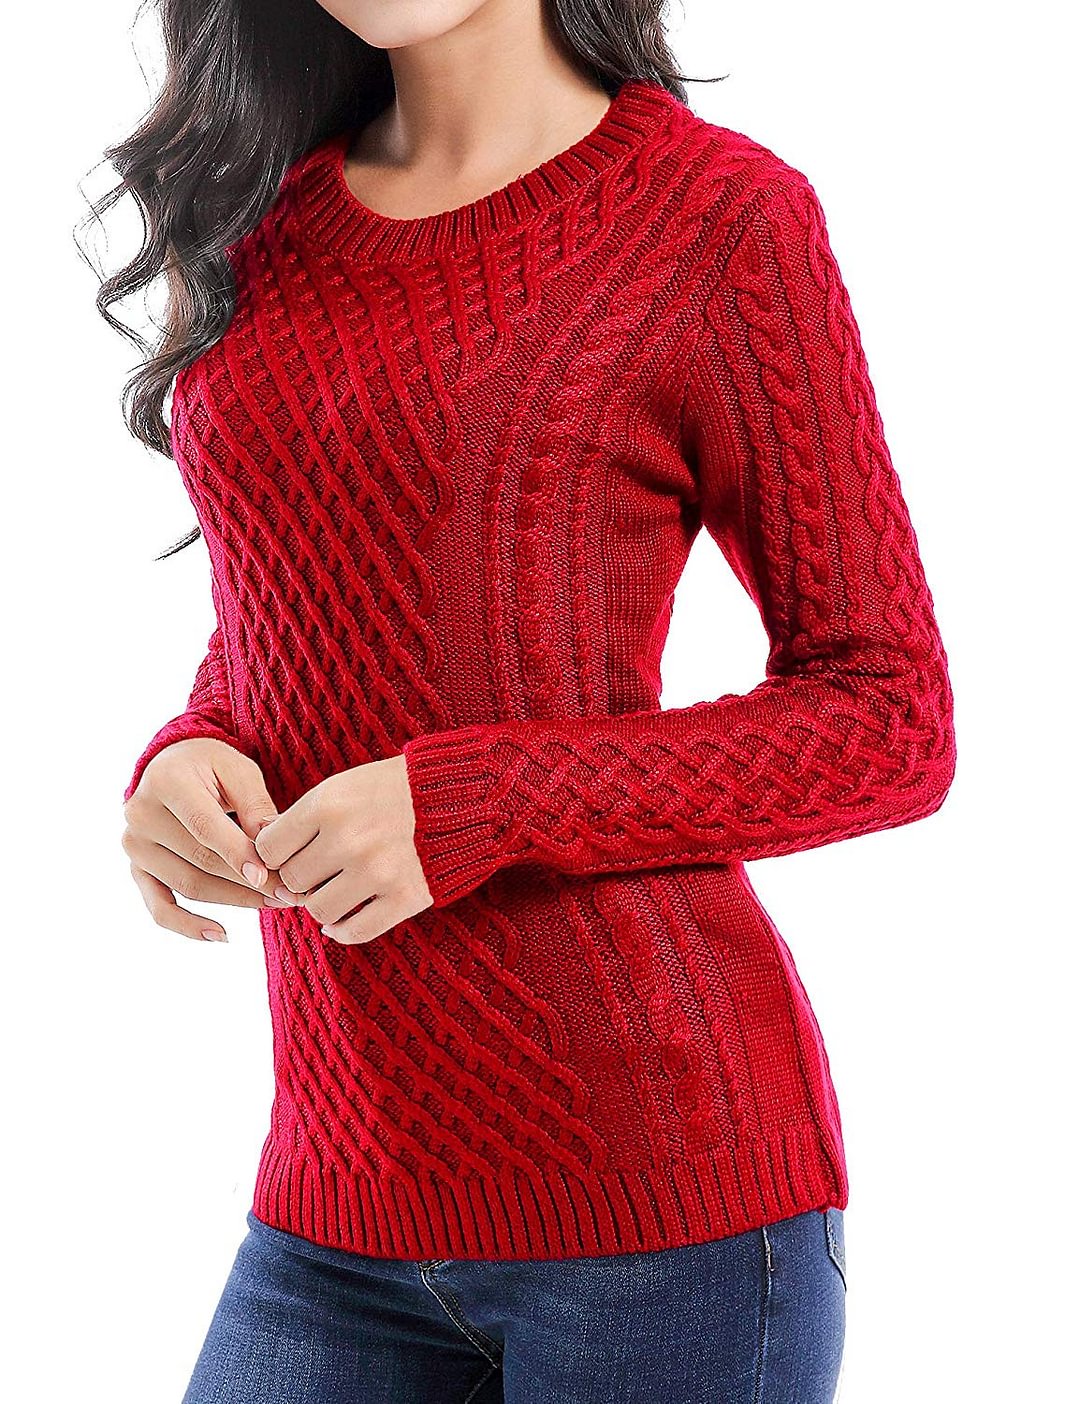 Crew Neck Knit Stretchable Elasticity Long Sleeve Sweater Jumper Pullover